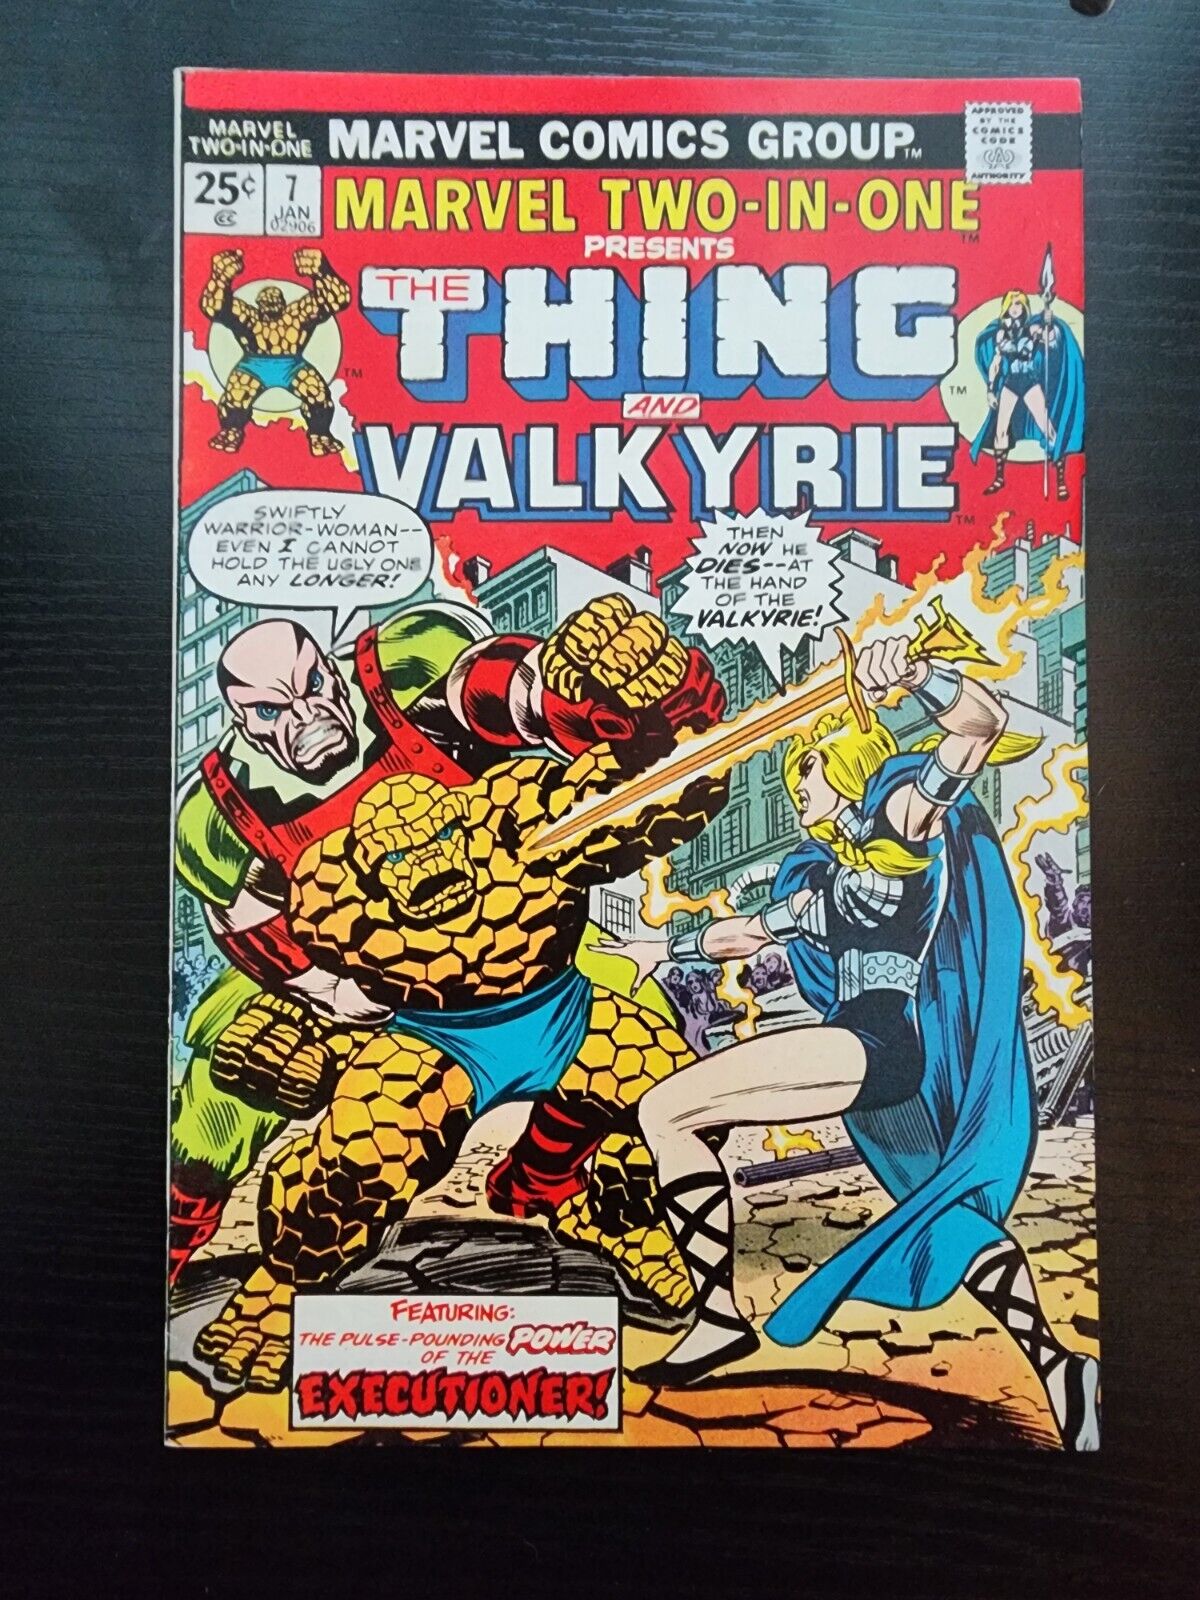 Marvel Comics Marvel Two In One #7 (1974) - Thing/Valkyrie vs Executioner